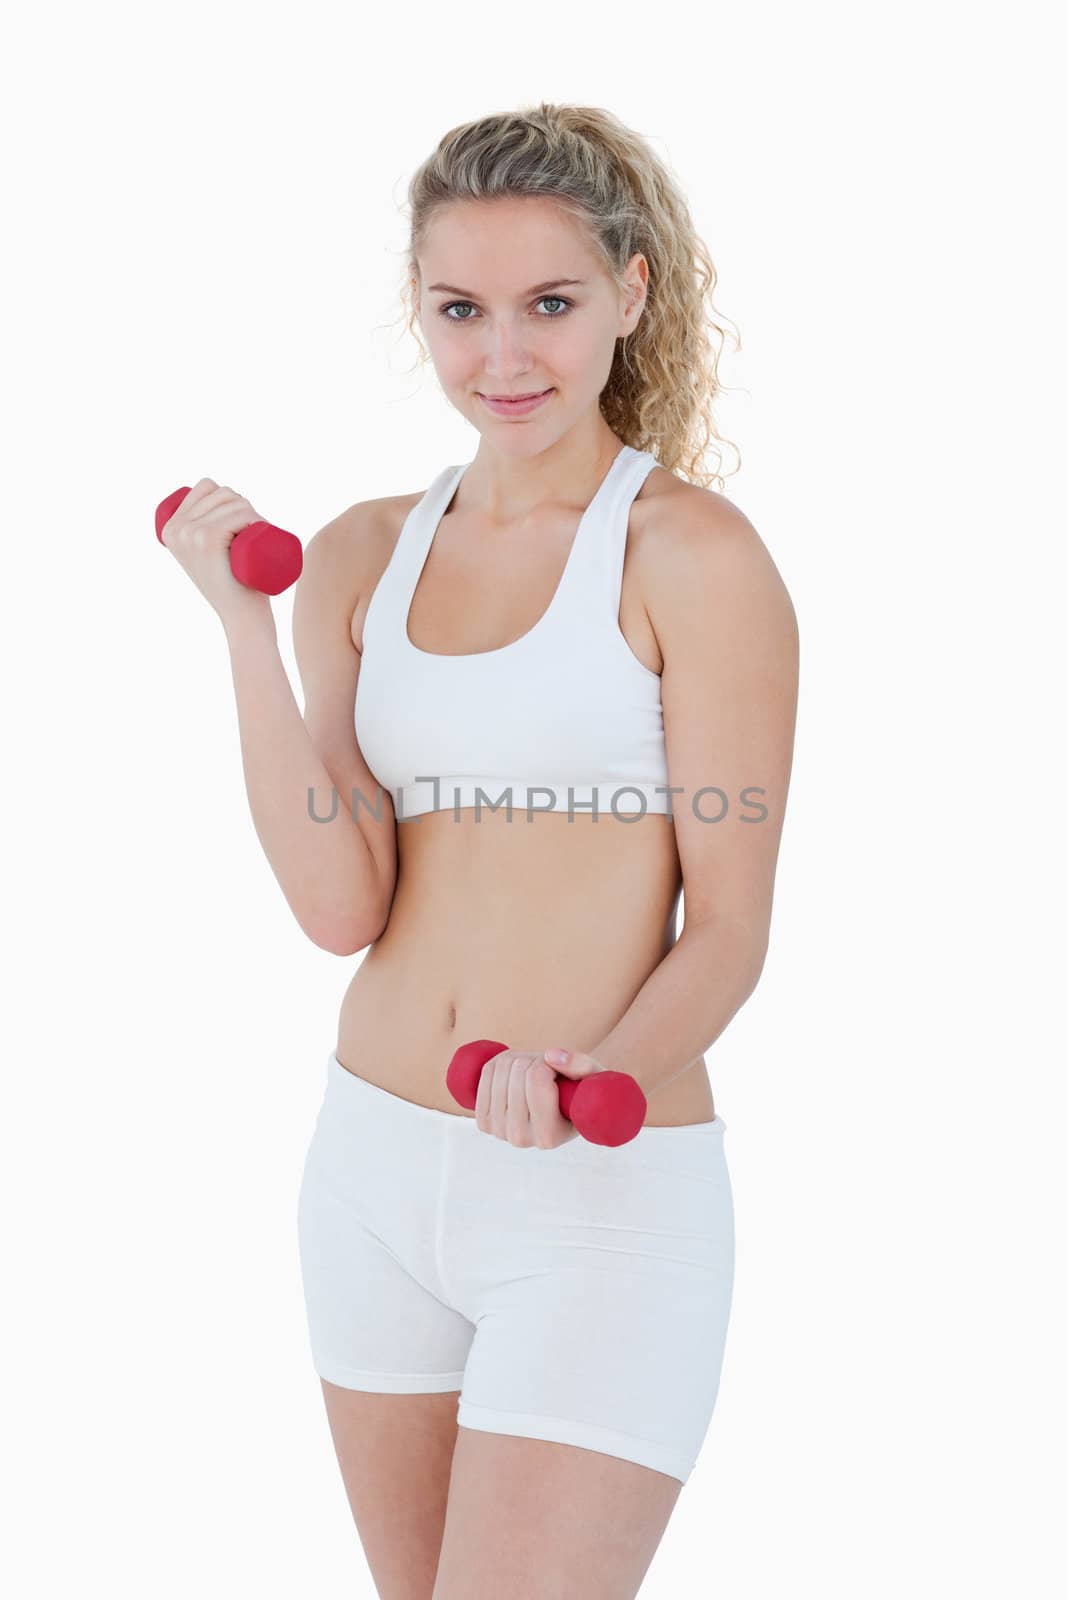 Young smiling woman lifting weights against a white background